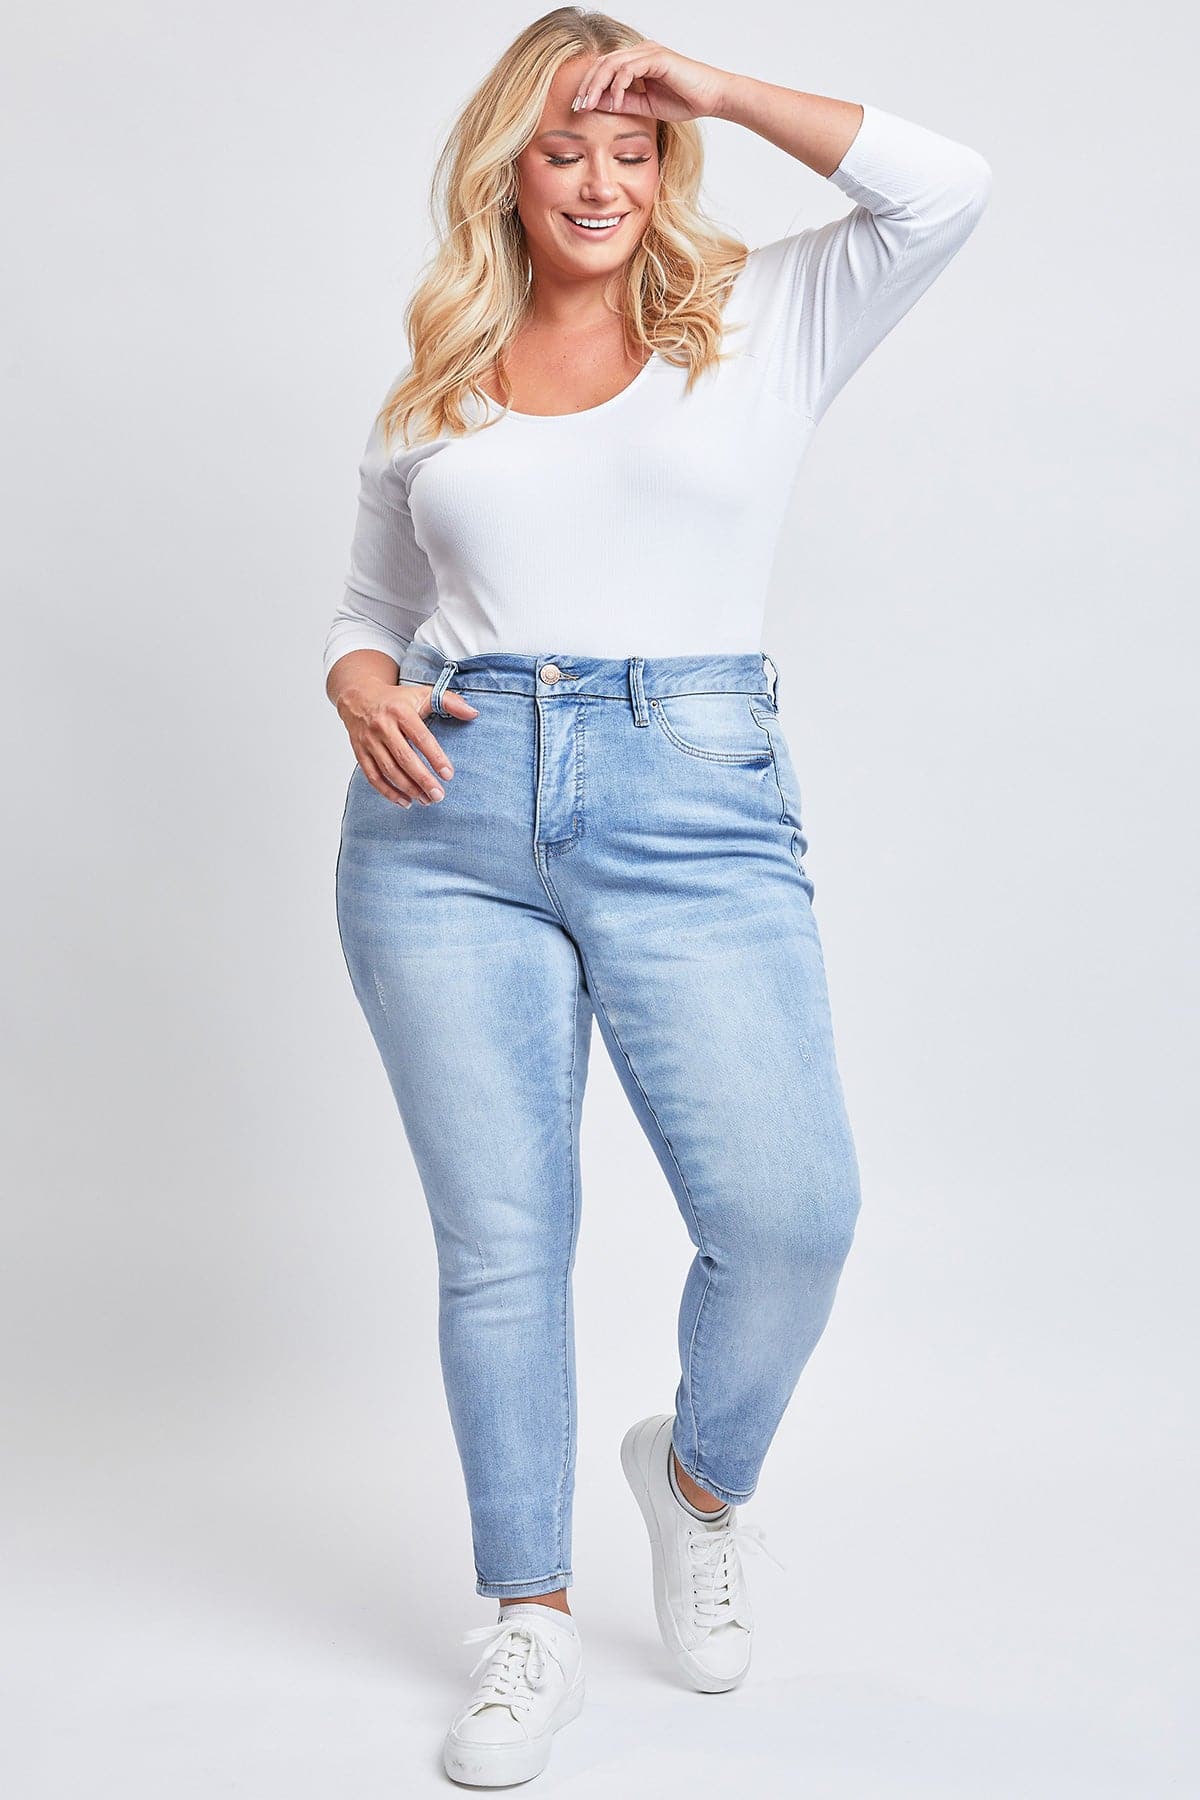 Women's Plus Size Sustainable Curvy Fit High Rise Skinny Jeans